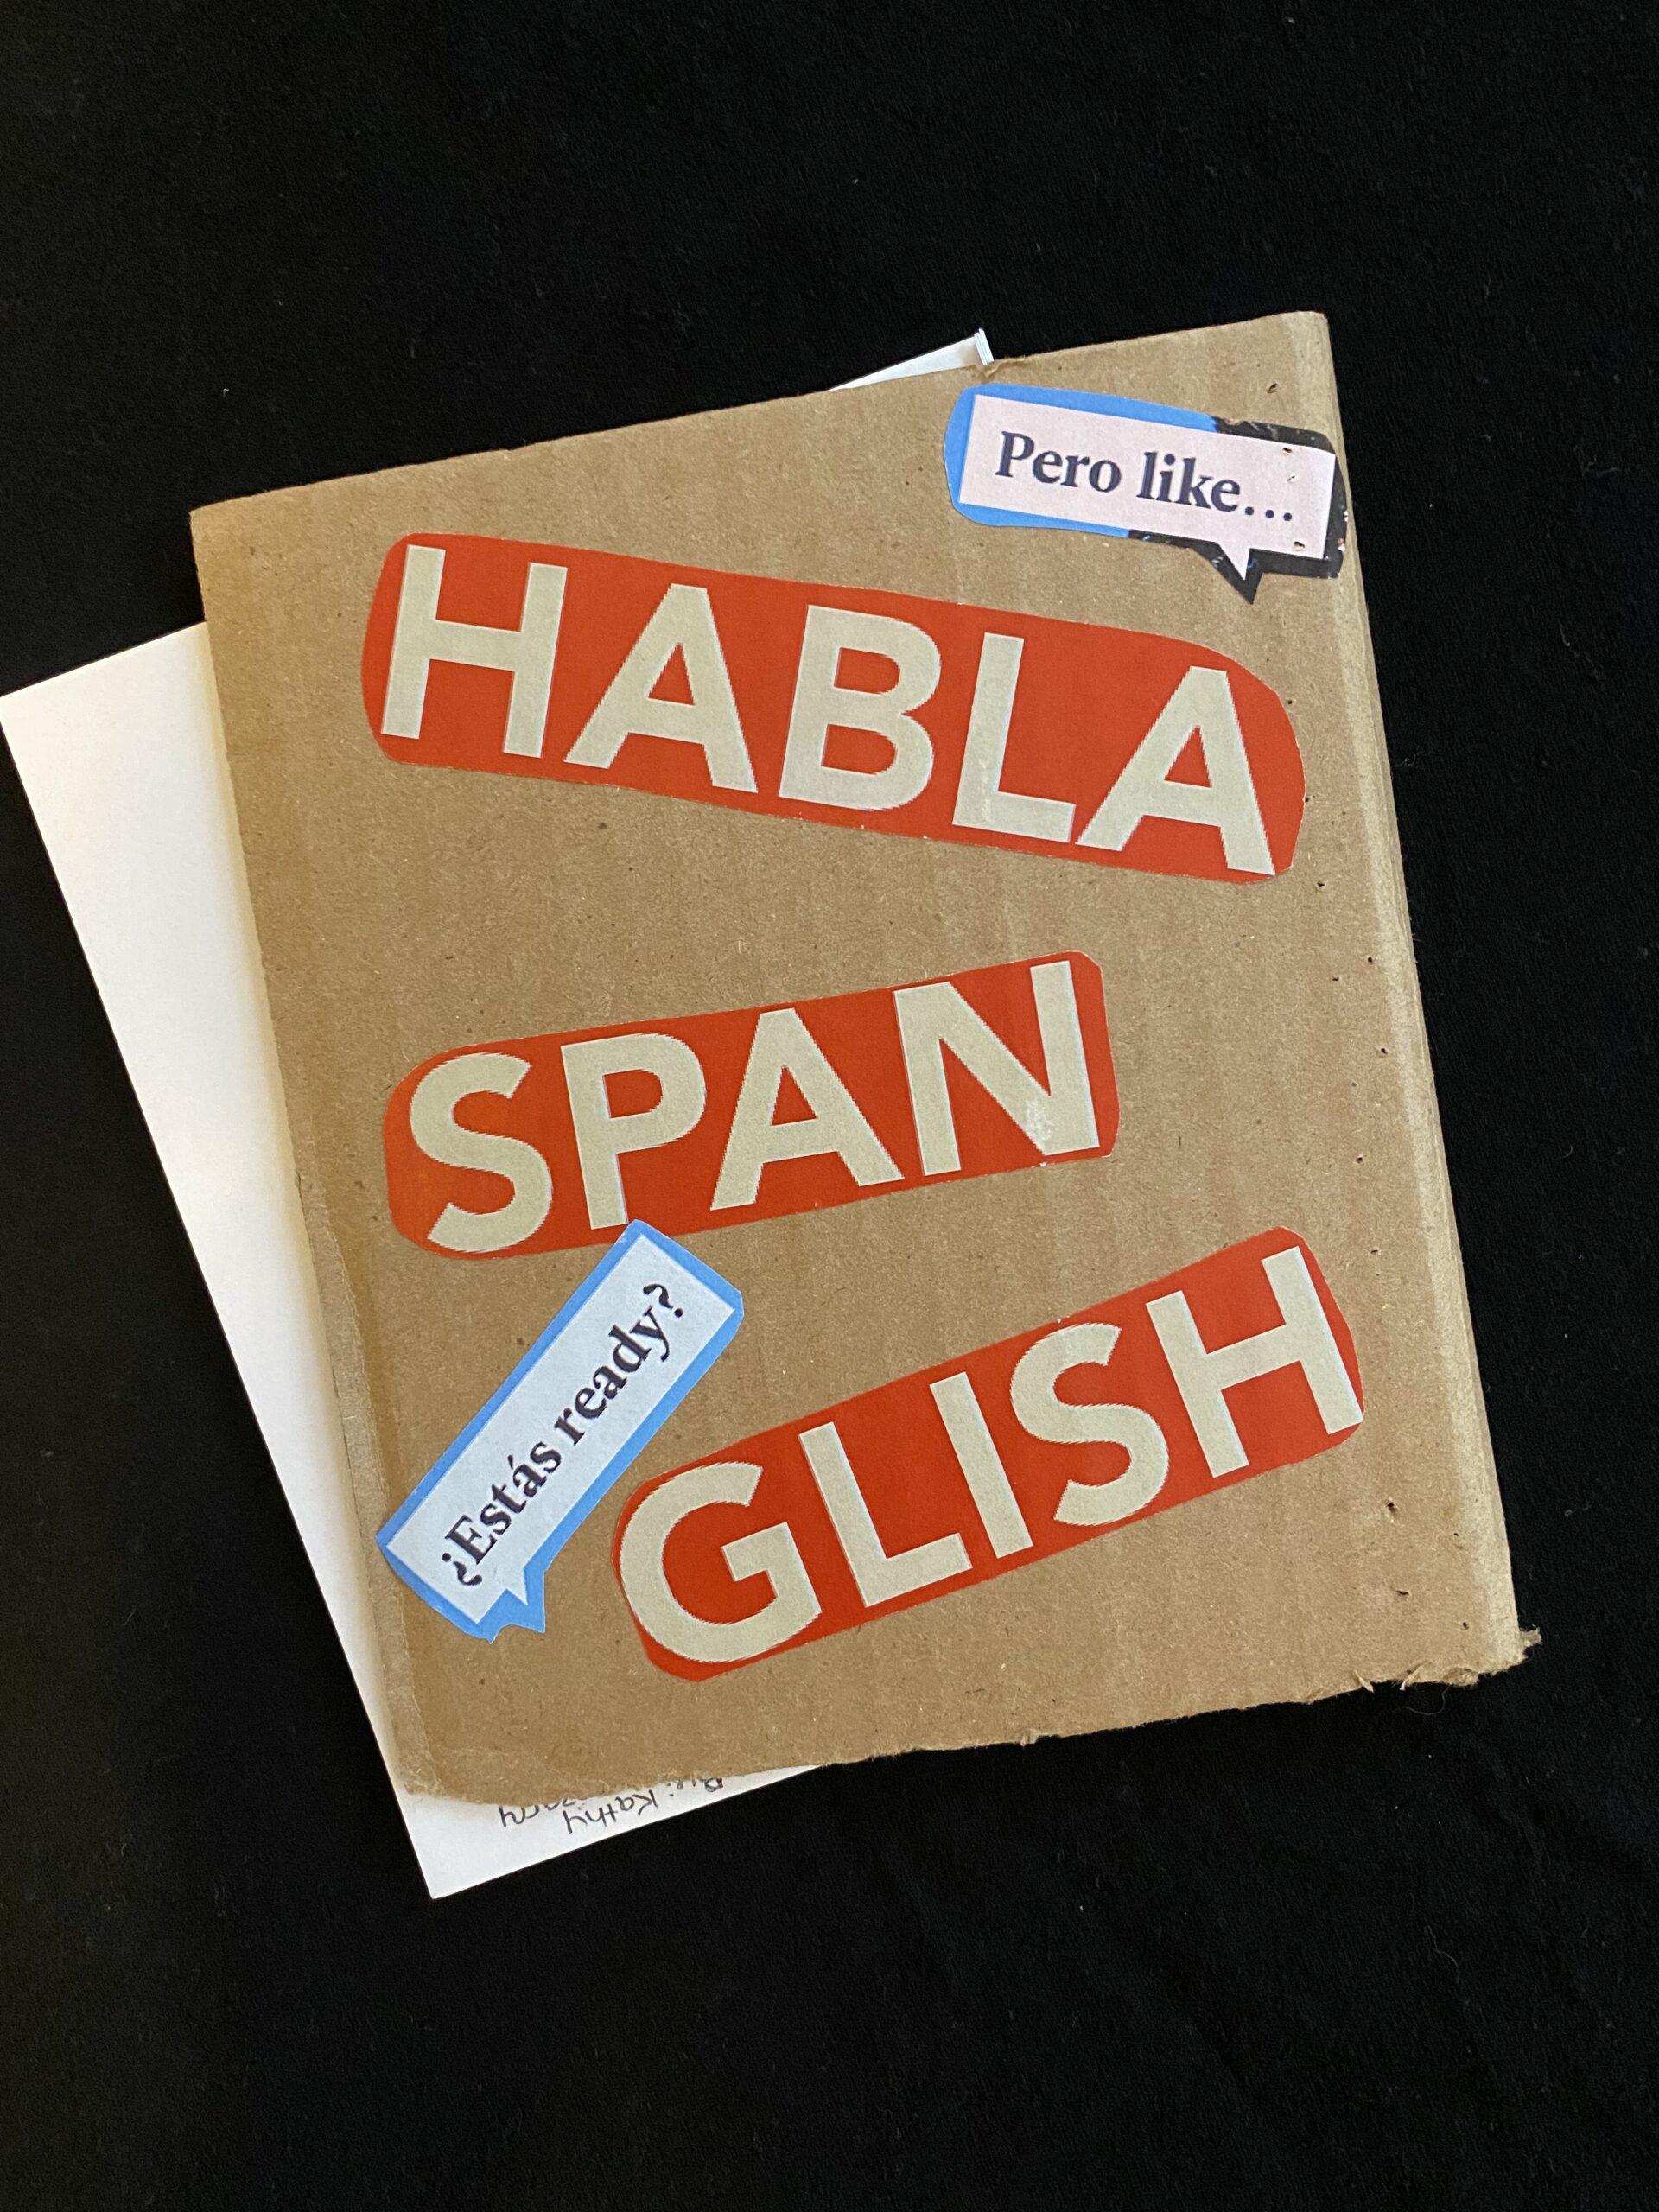 cartonera book cover with collage text that reads "Habla Spanglish" with word bubbles that say "Pero like..estas ready?"